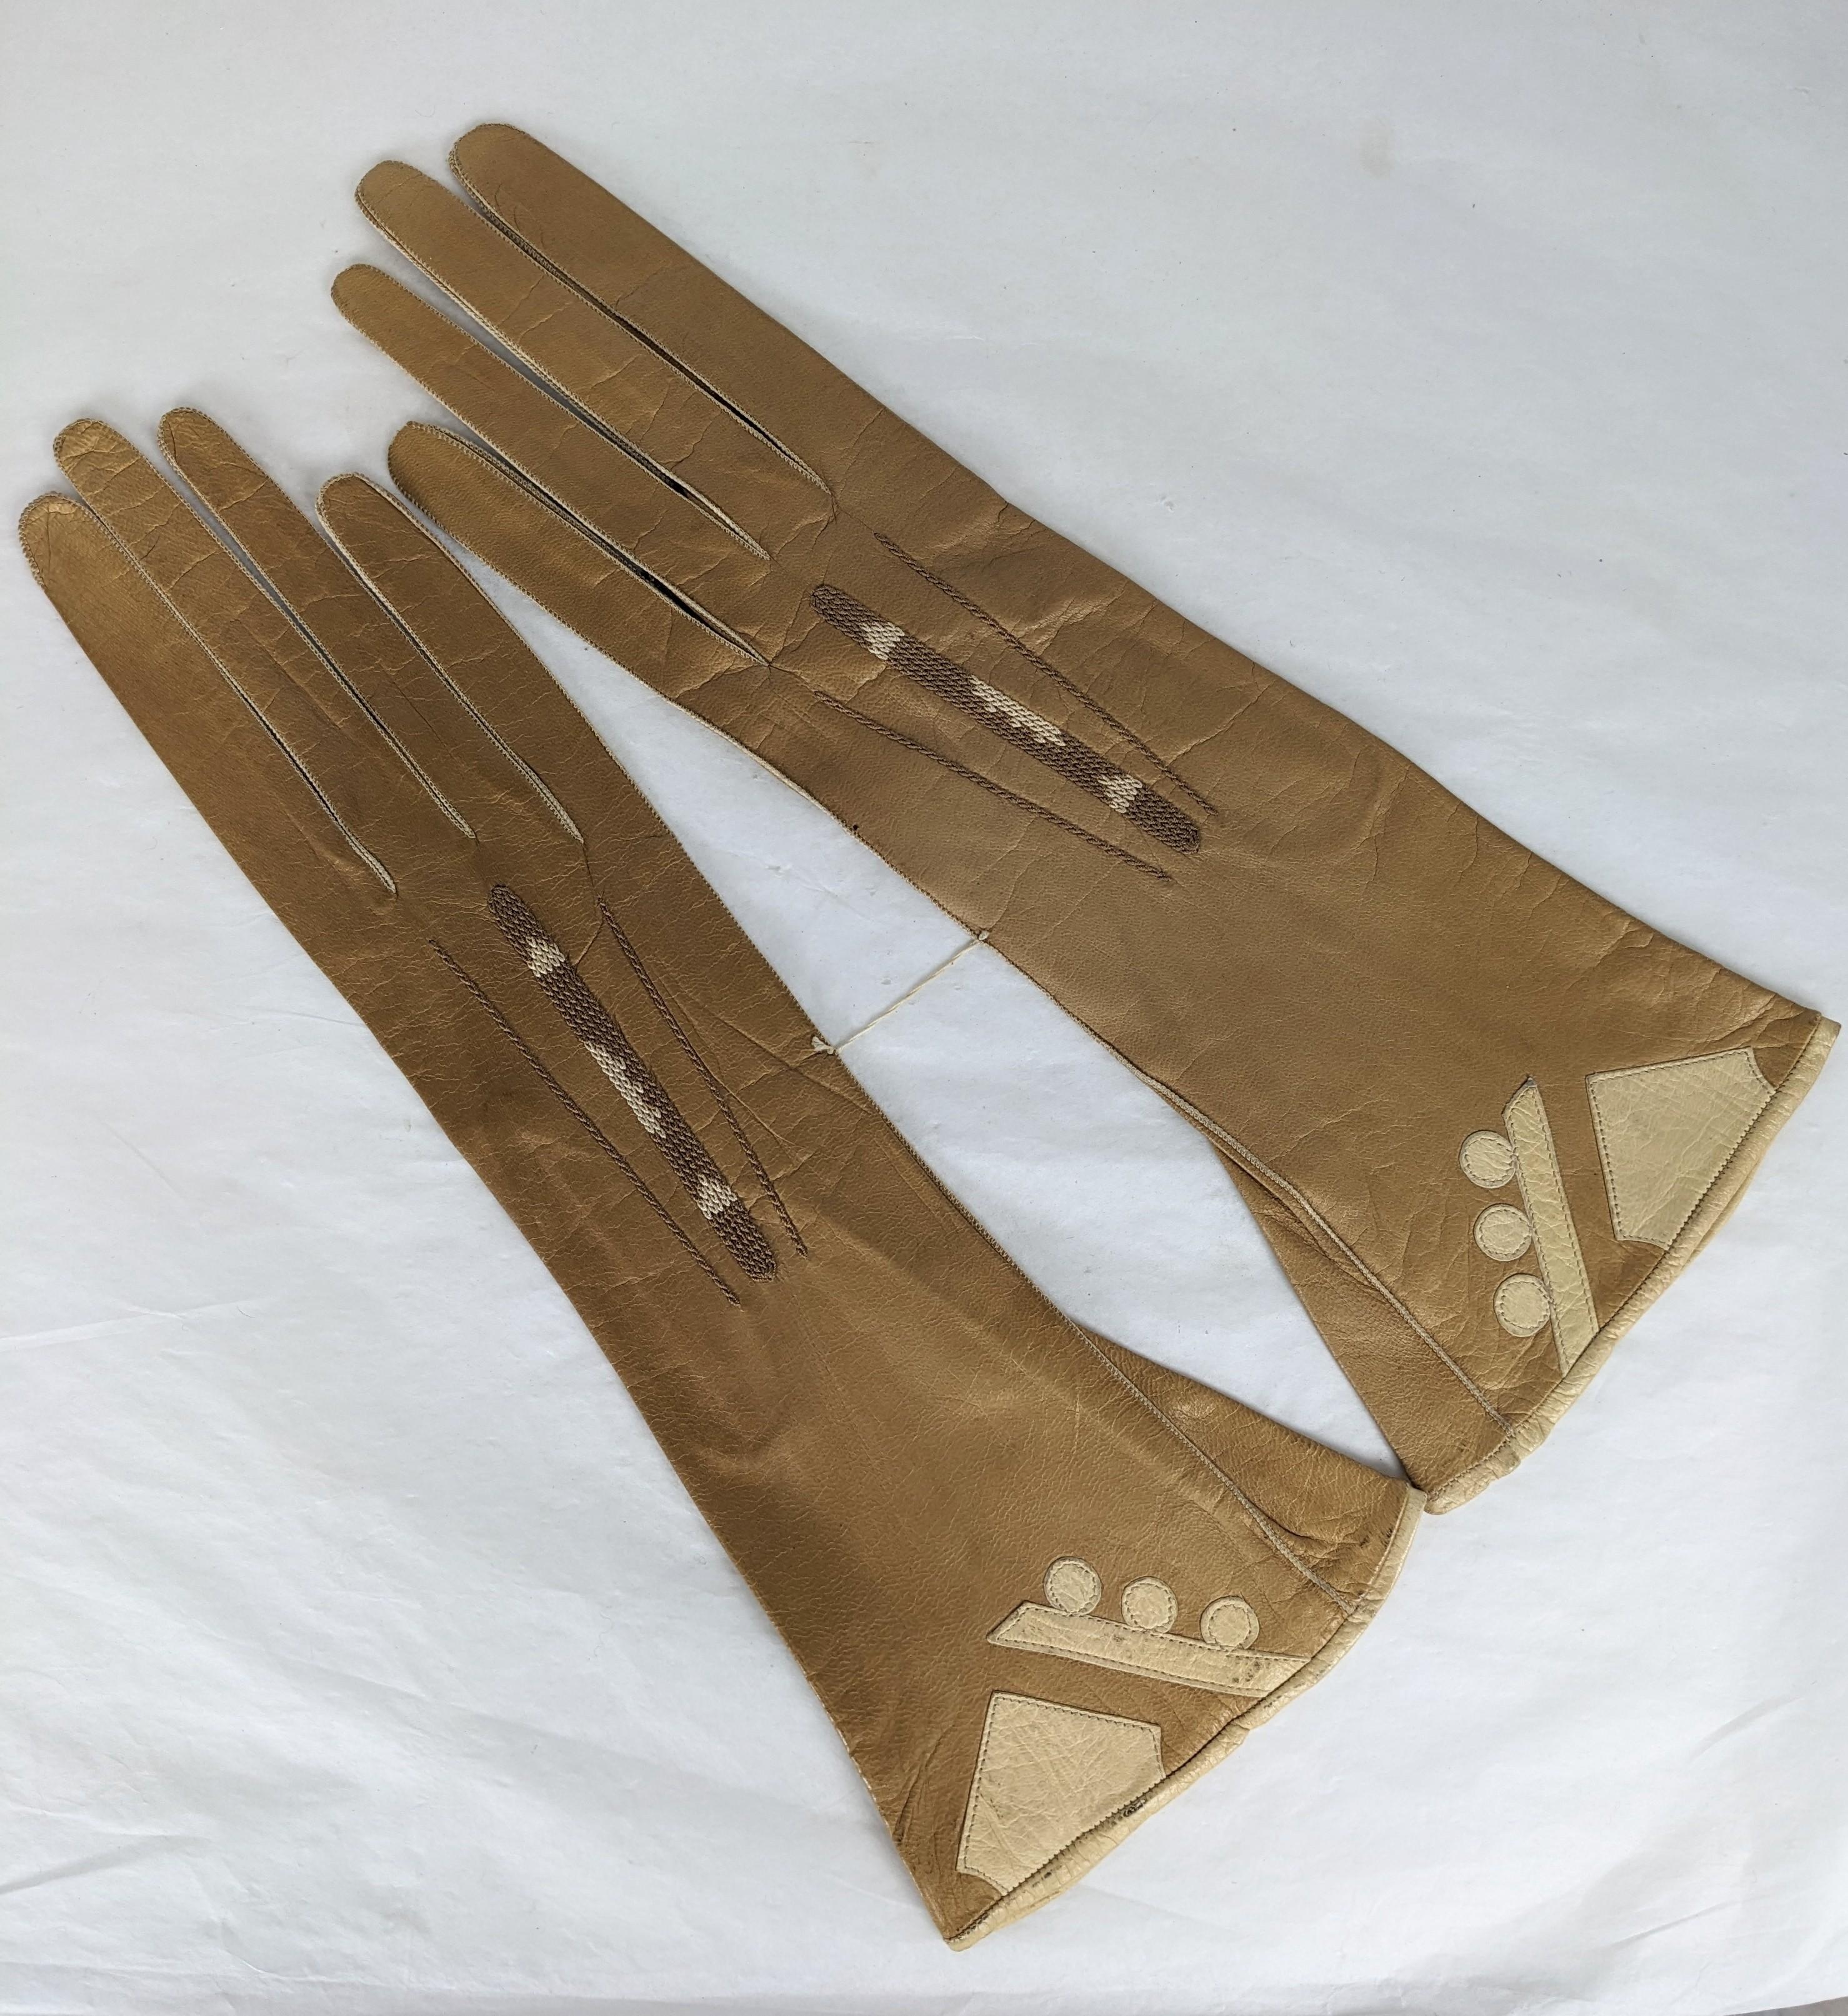 Charming Art Deco Motif Leather Gloves which have never been worn. They are still stitched together as they were sold in the period. Art Deco leather applique designs at cuff and matching knitted design on top. Too tiny to be worn today but